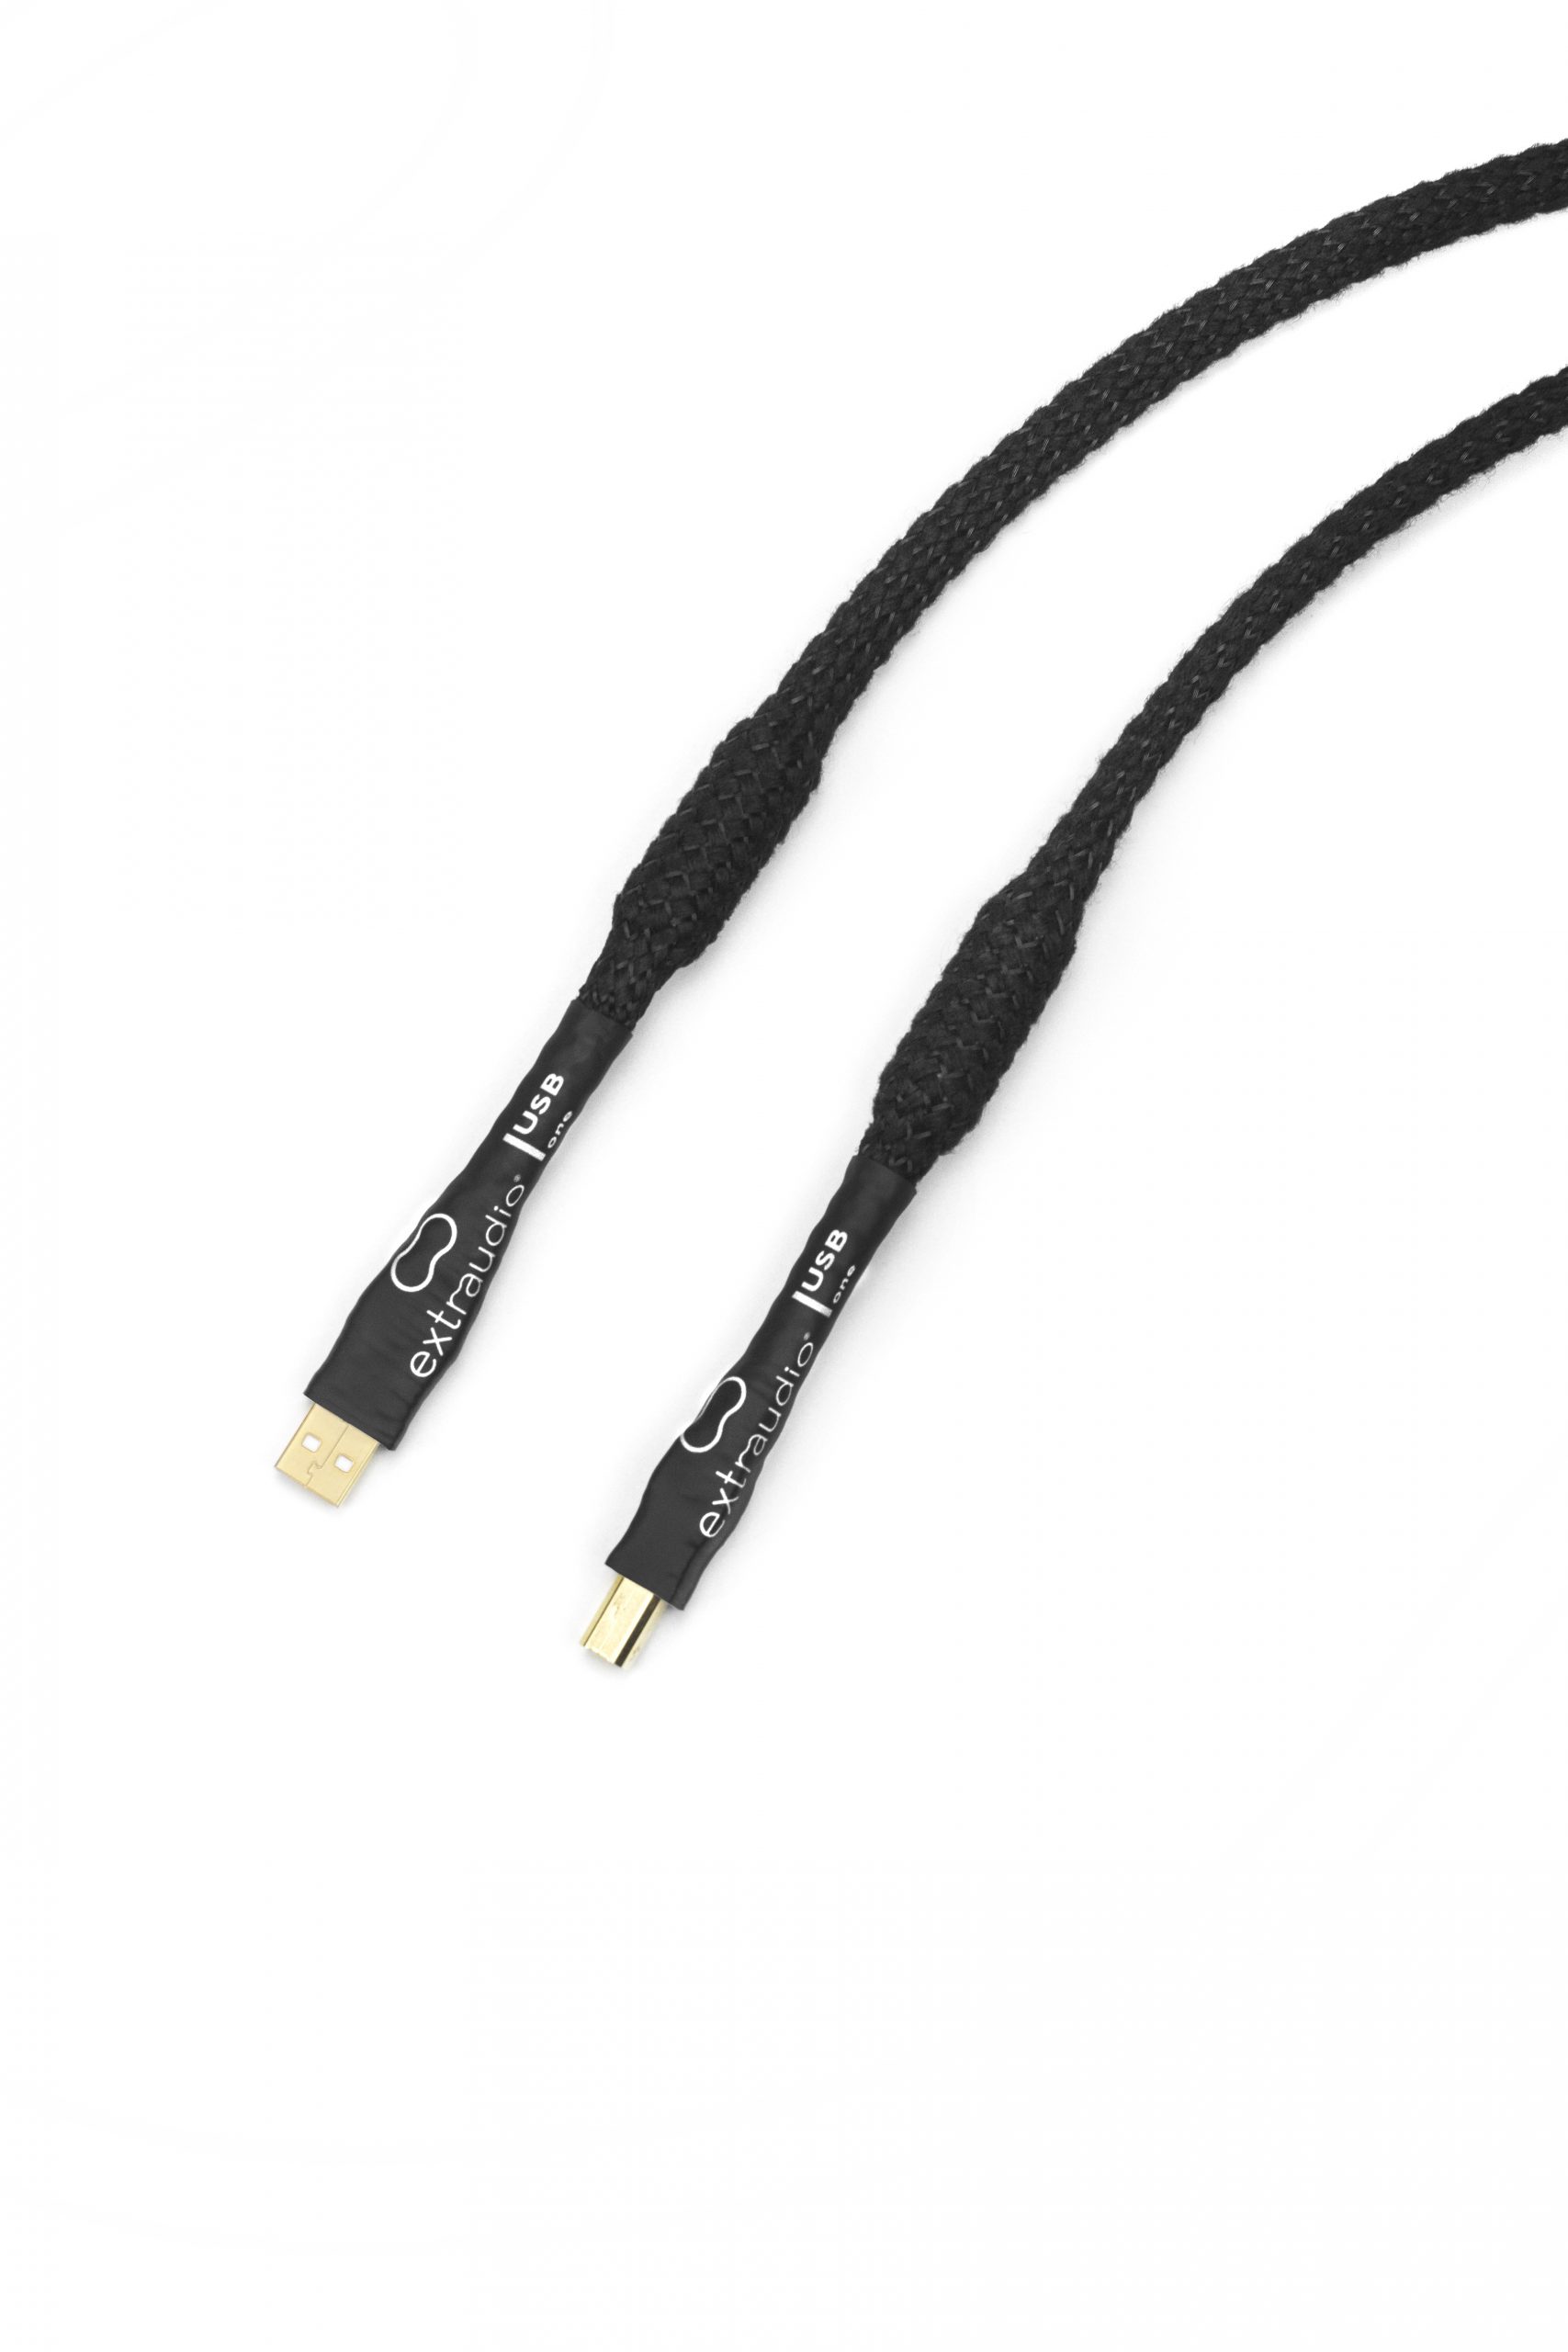 Extraudio USB One-cable USB